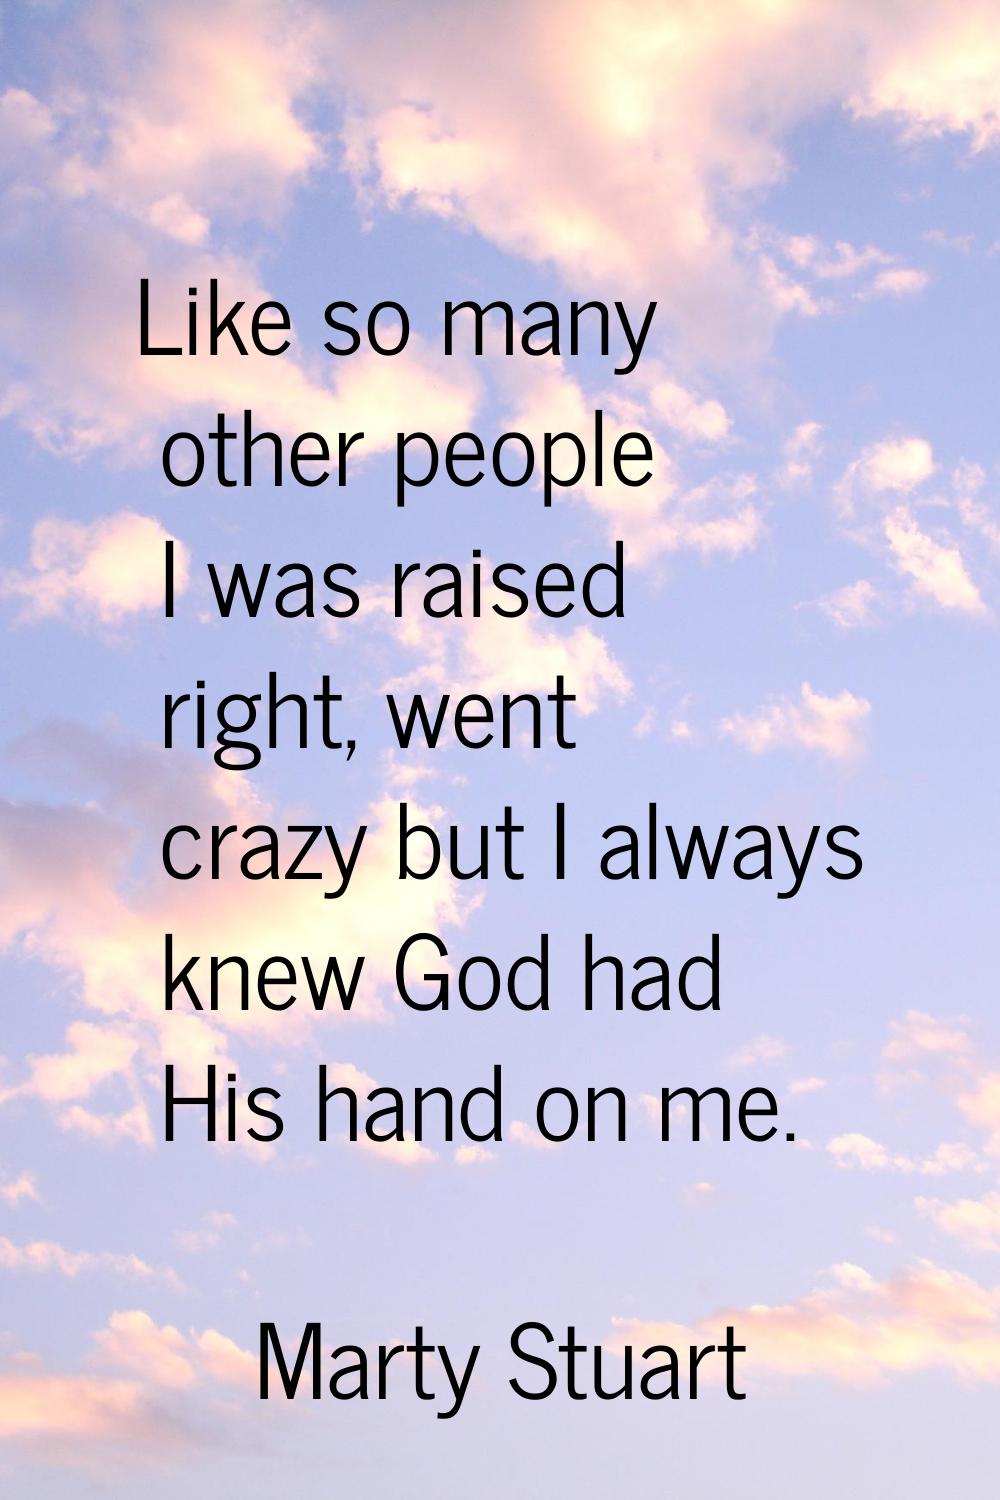 Like so many other people I was raised right, went crazy but I always knew God had His hand on me.